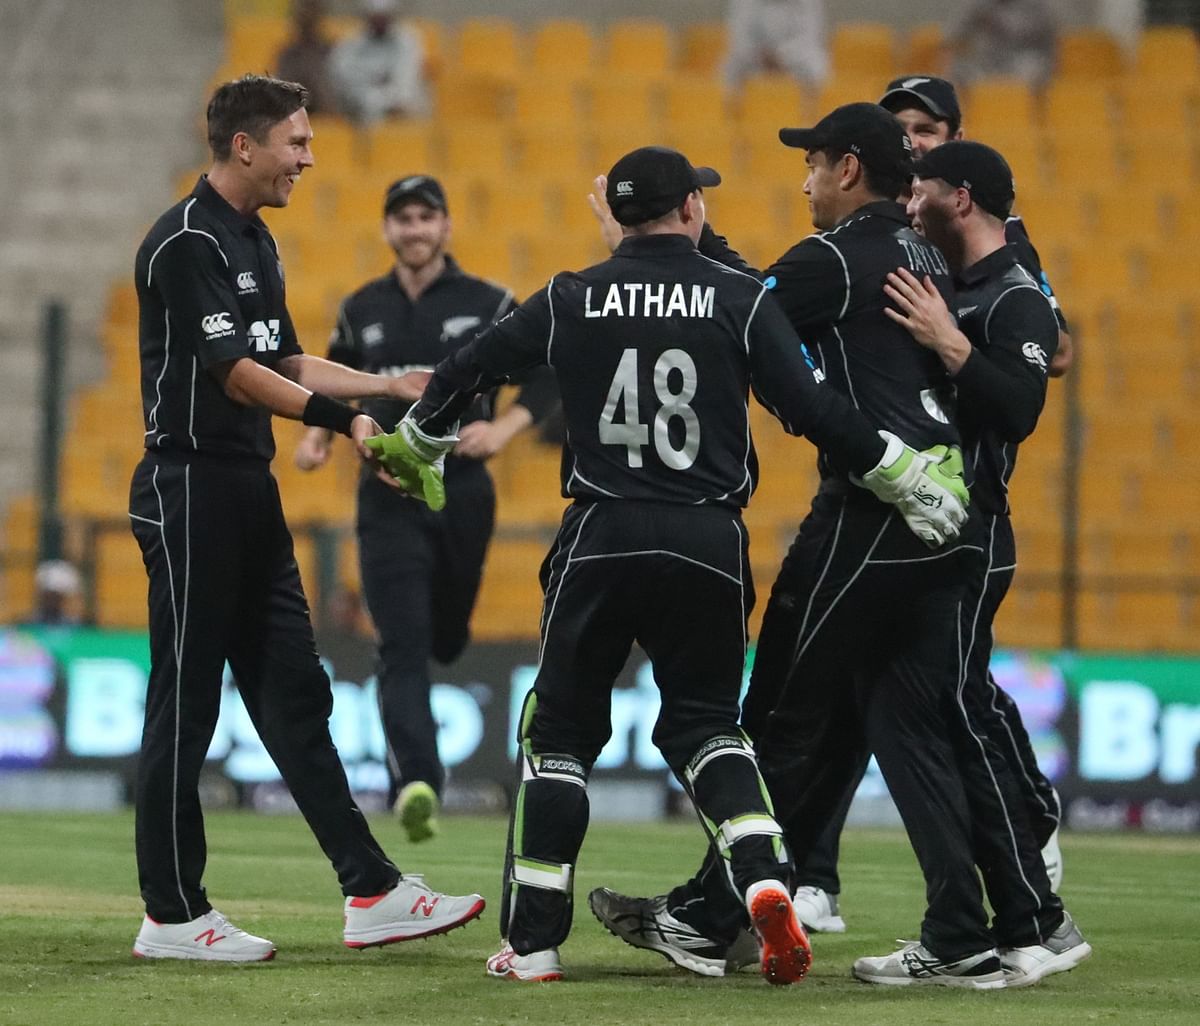 New Zealand cricketer Trent Boult (L) celebrates with teammates after he dismissed Pakistan batsman Babar Azam during the first one day international (ODI) cricket match between Pakistan and New Zealand at the Sheikh Zayed Cricket Stadium in Abu Dhabi on 7 November 2018. Photo: AFP